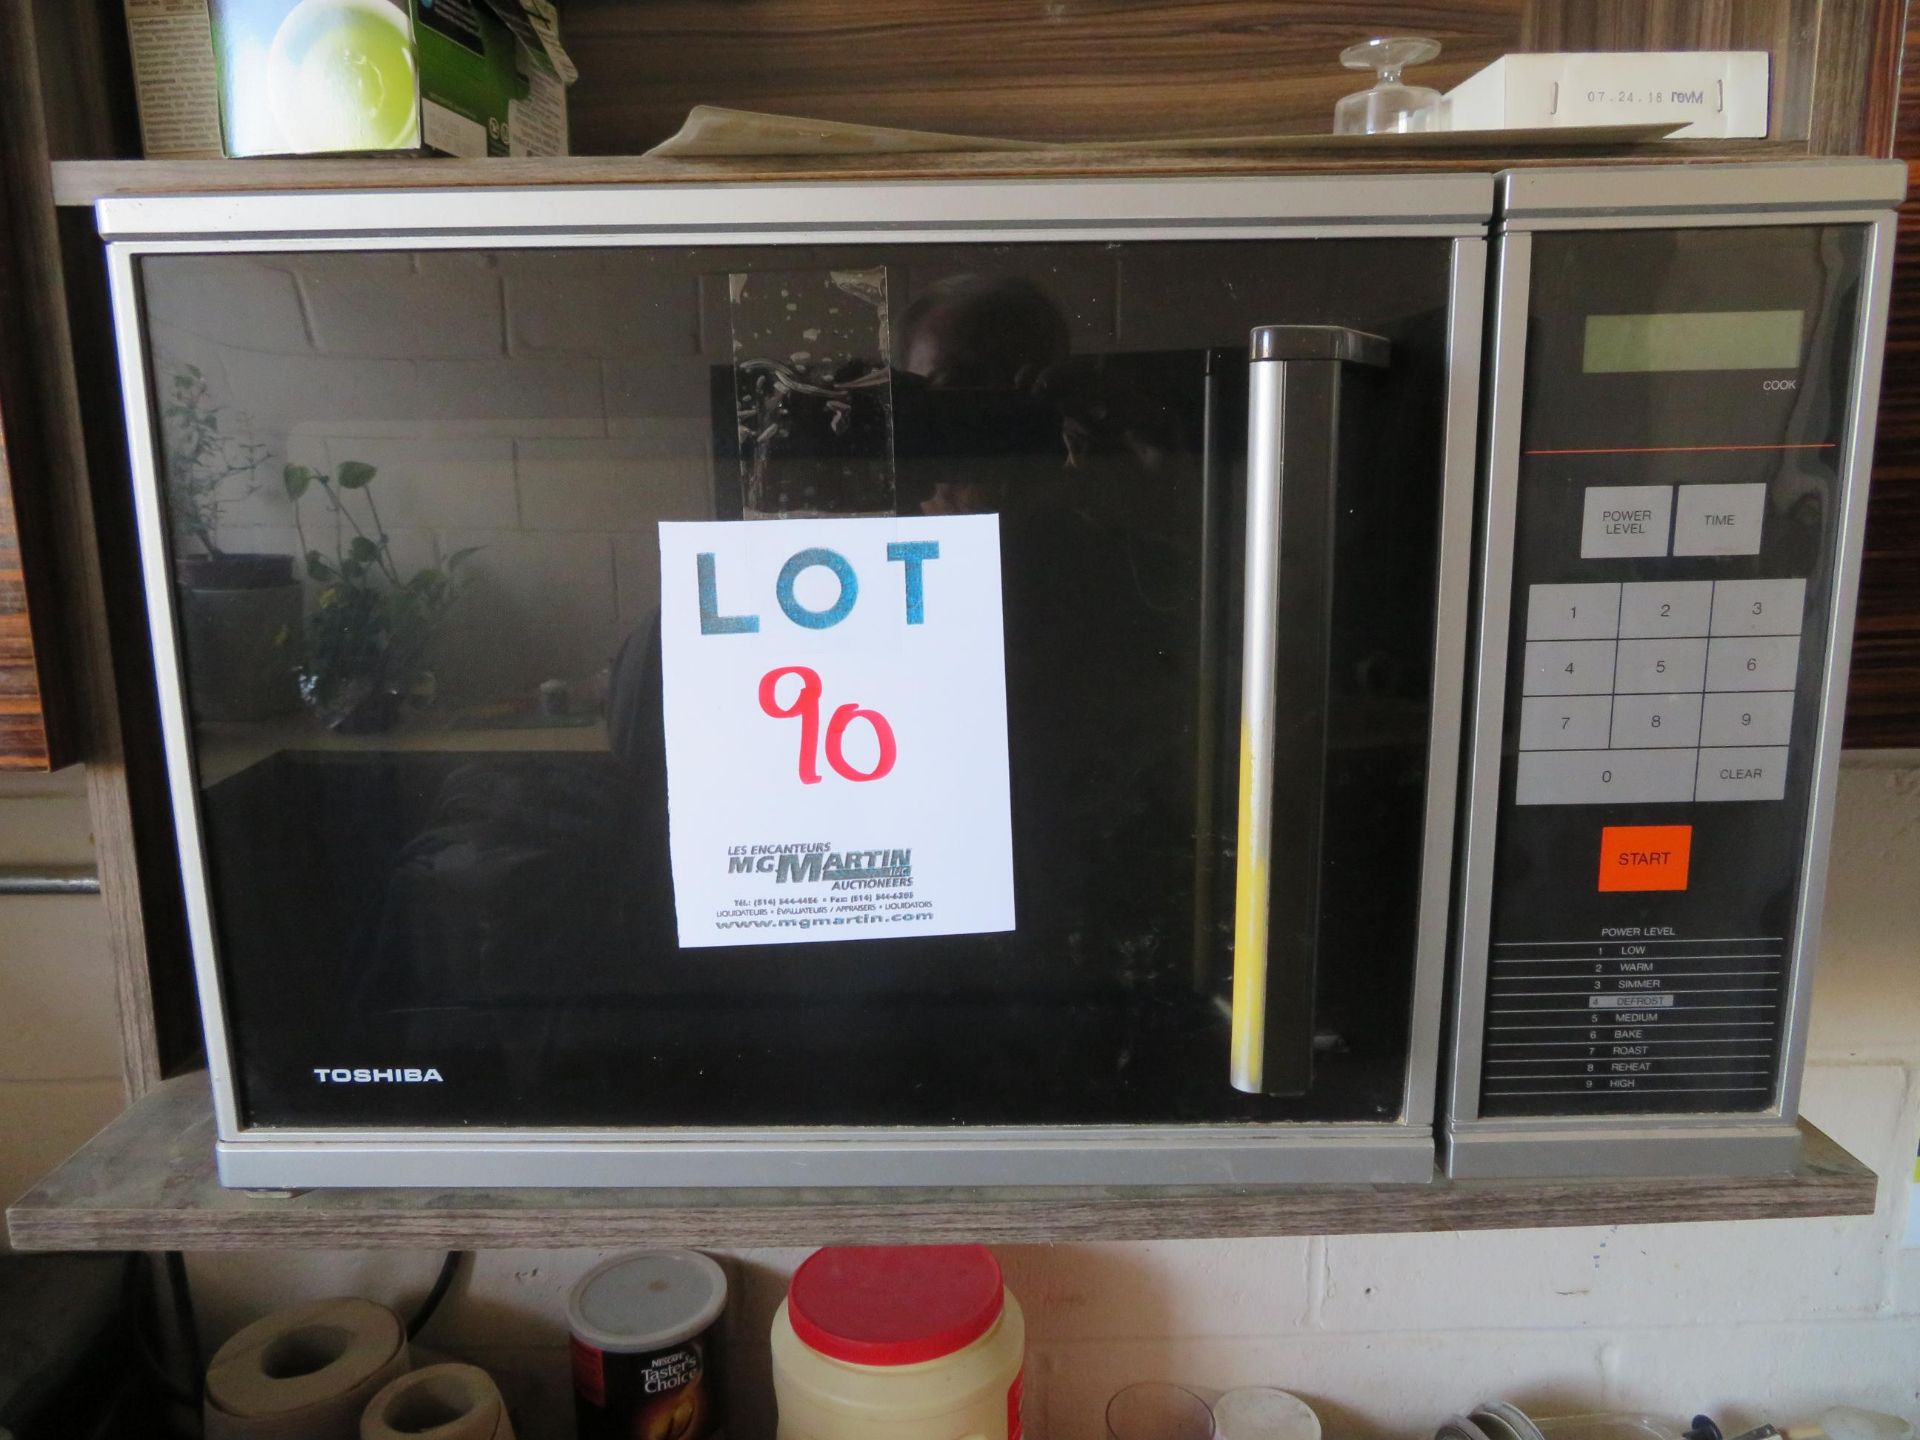 LOT including FRIGIDAIRE refrigerator and TOSHIBA microwave oven, etc. - Image 2 of 2